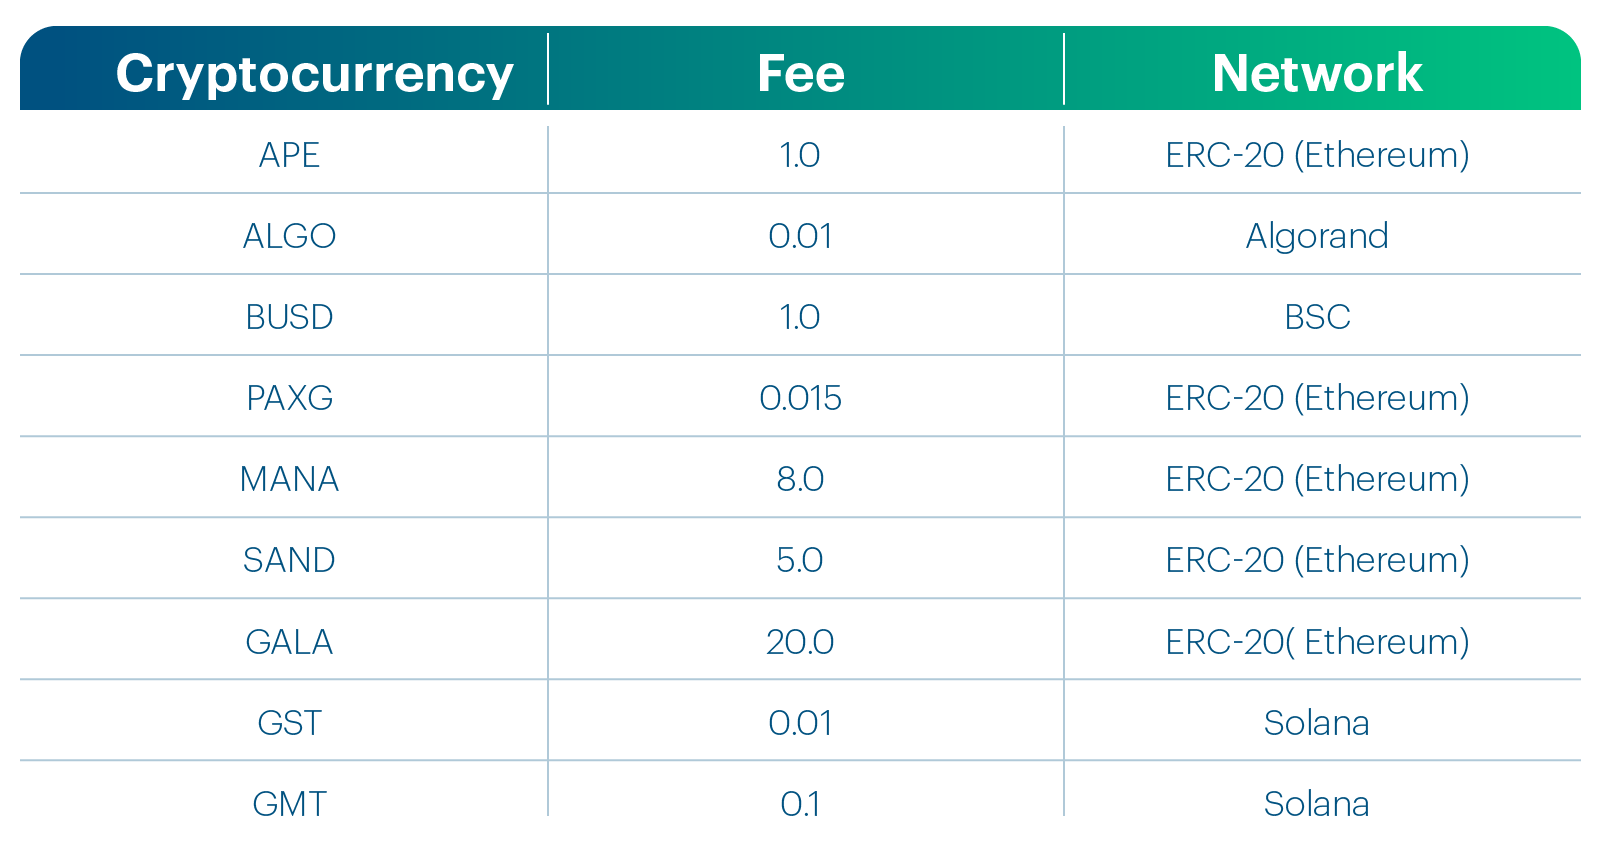 9newtokens_network fees.png